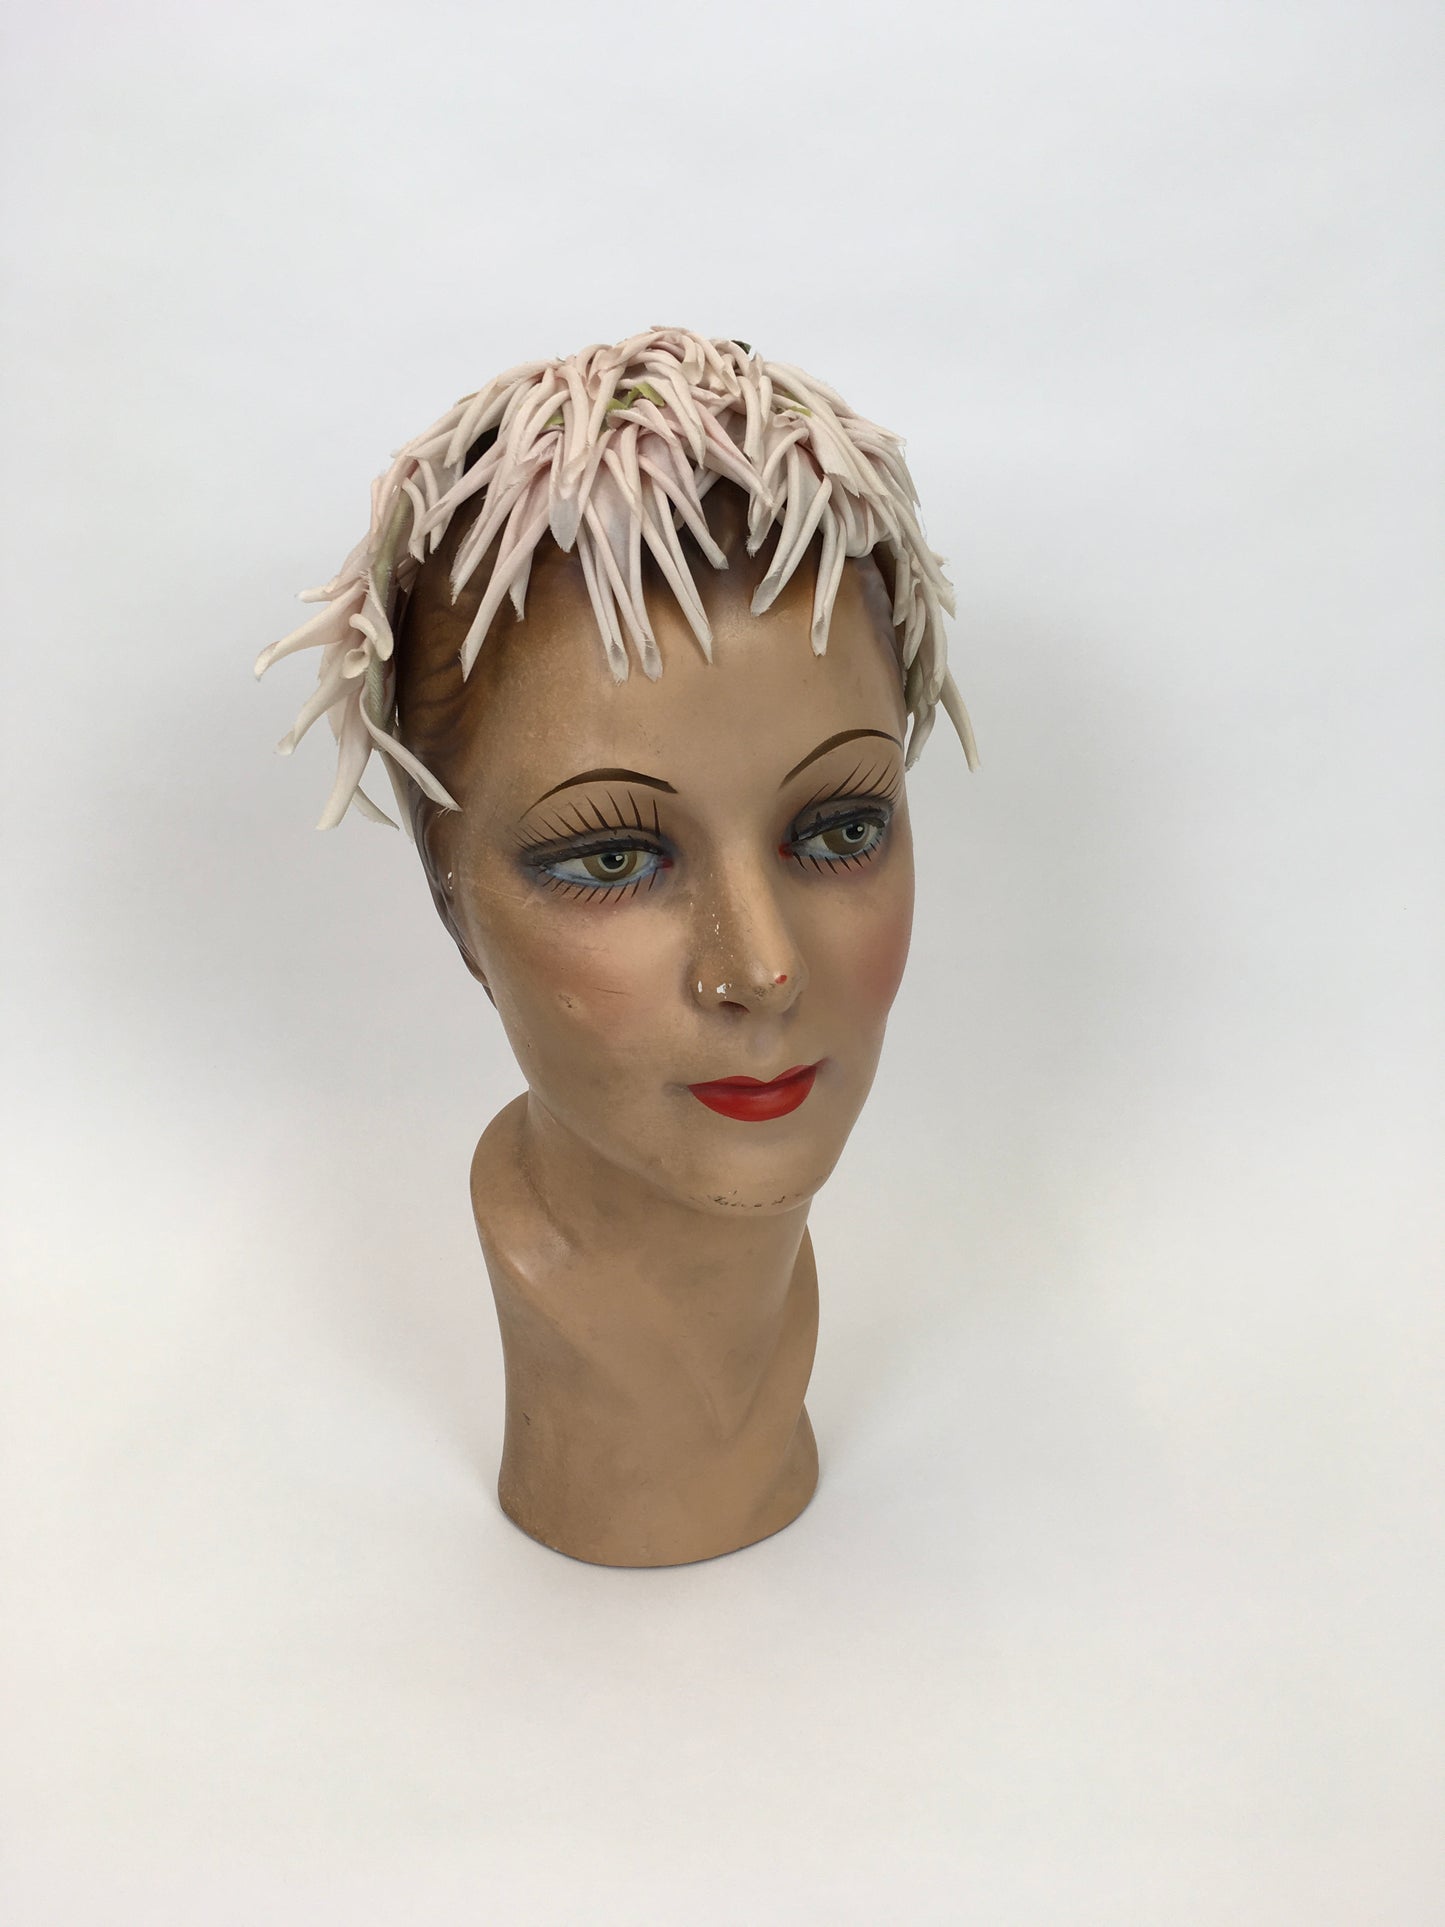 Original 1950s Velvet and Floral Headpiece - In a Delicate Pallet of Soft Pinks, Pale Ivory and Green